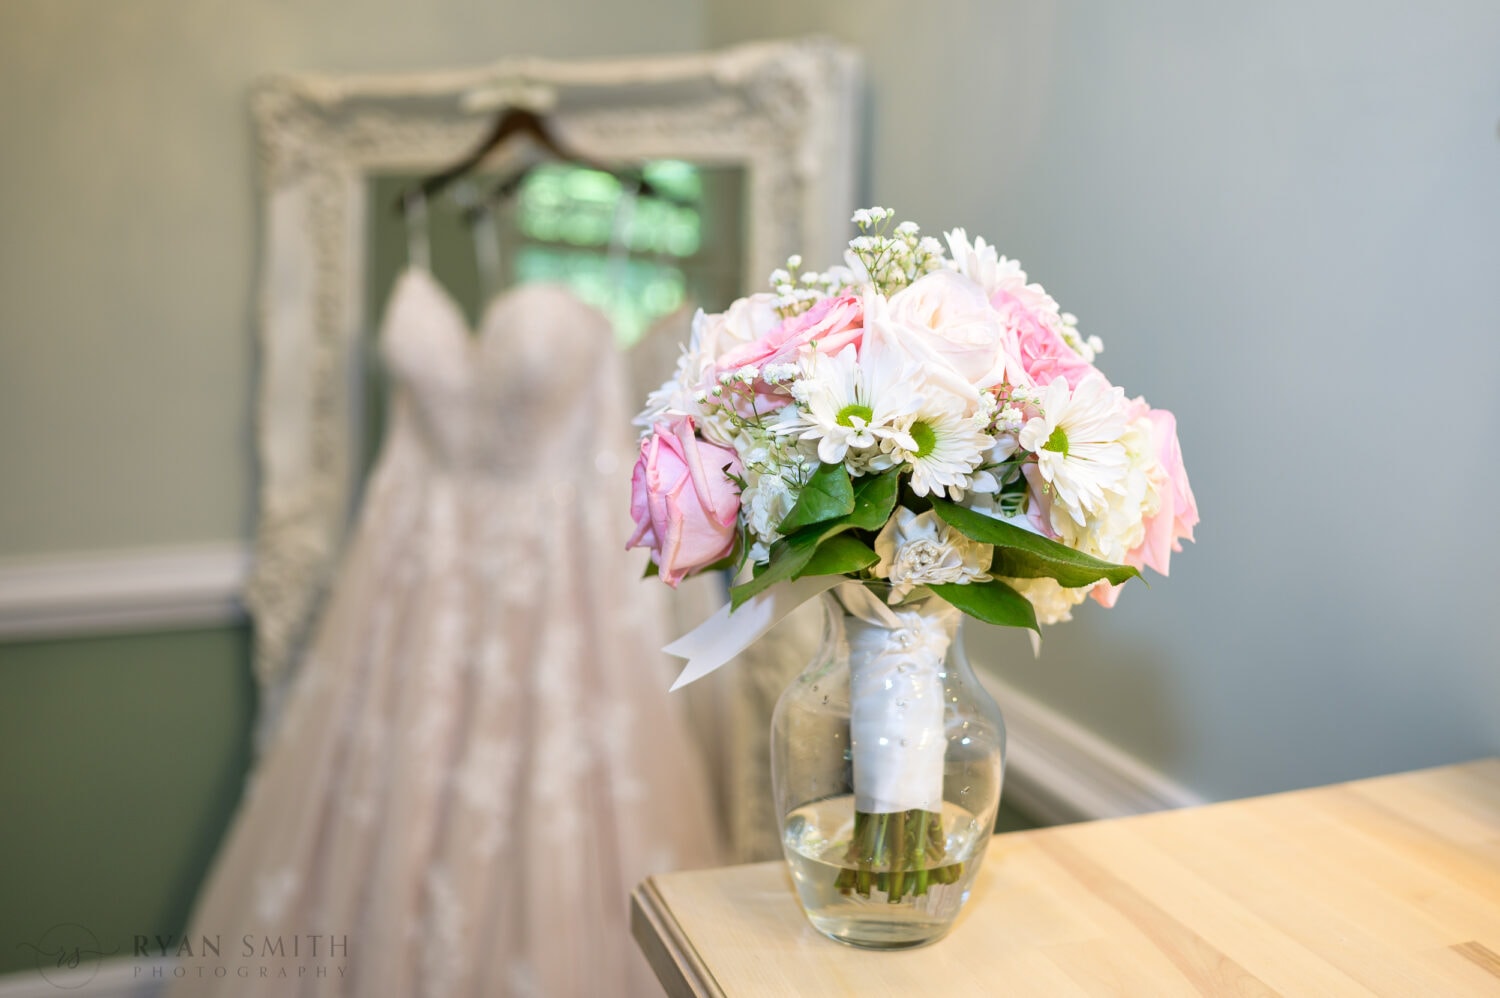 Bouquet with dress in the background - Pawleys Plantation